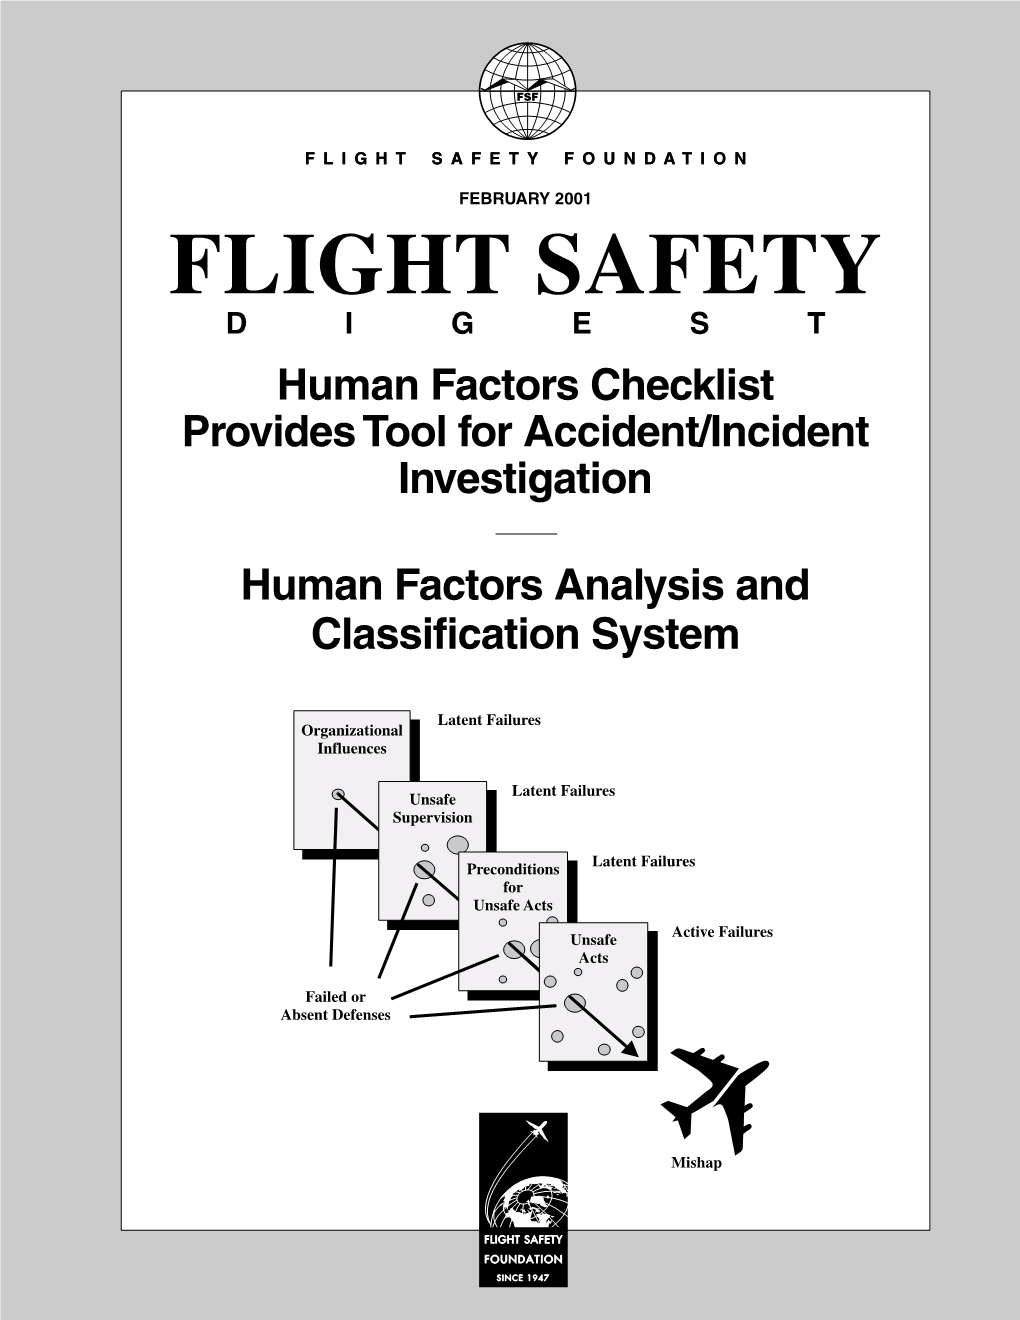 Human Factors Checklist Provides Tool for Accident/Incident Investigation